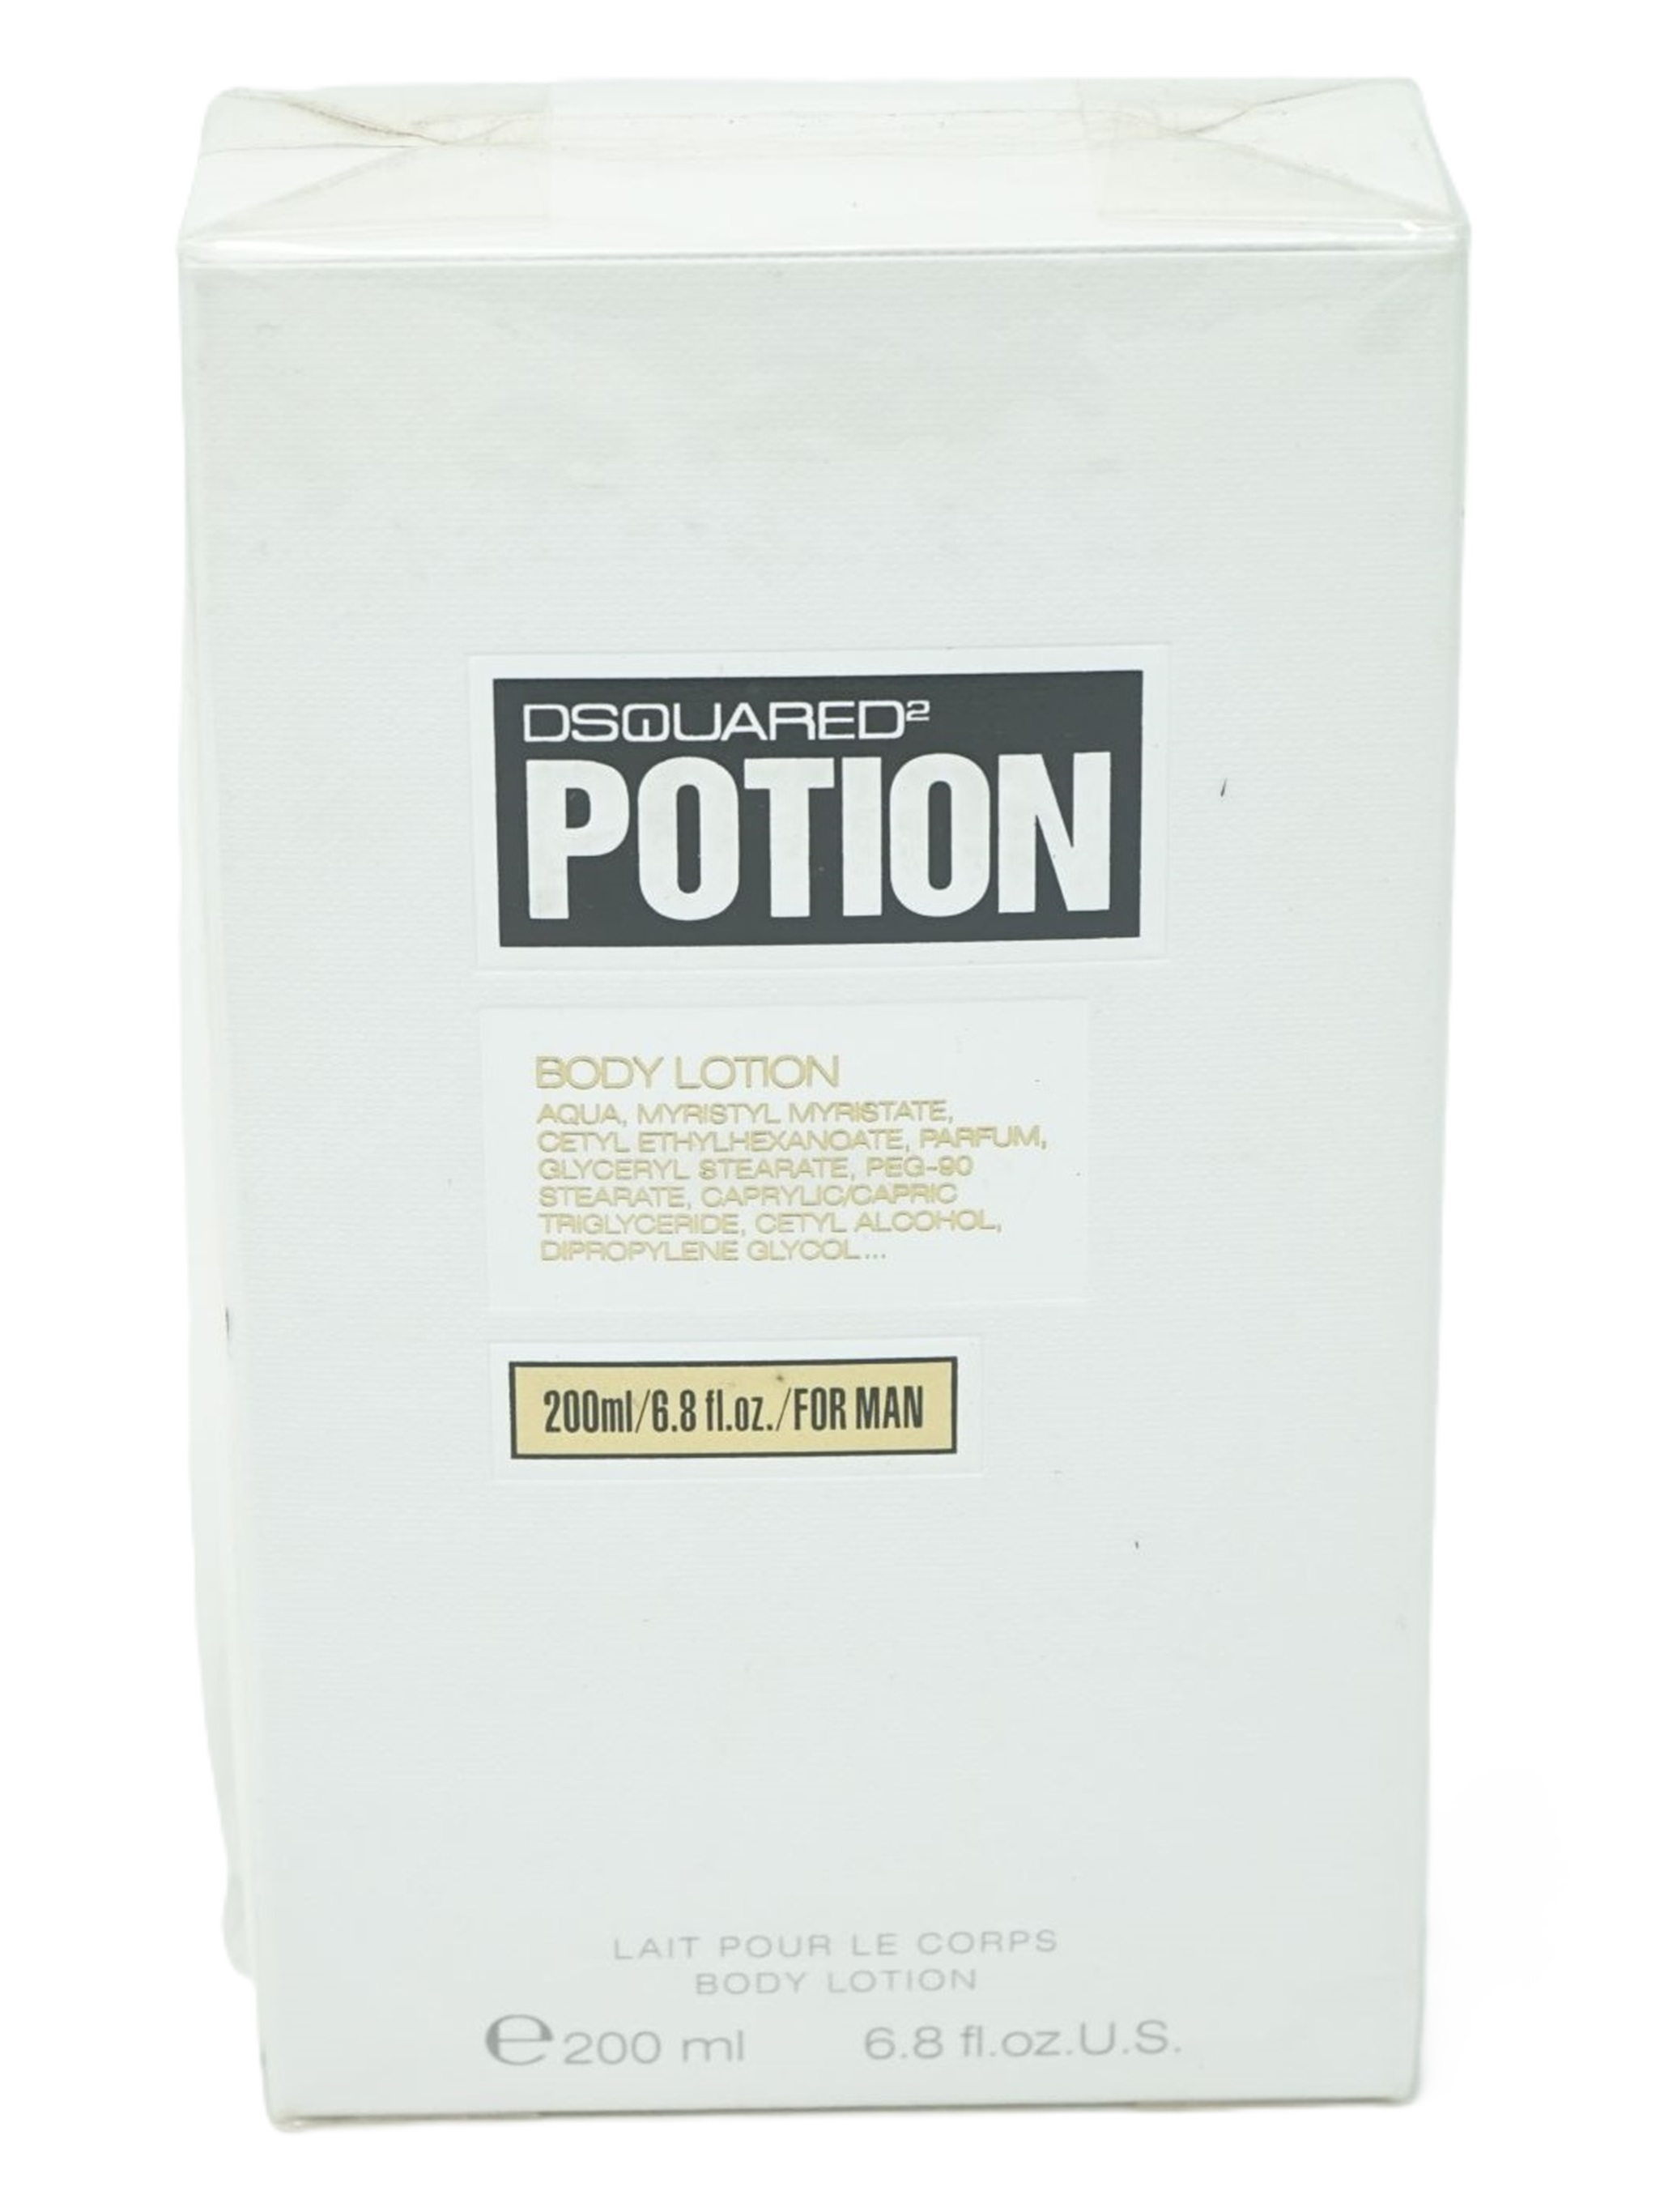 DSQUARED Potion Body Lotion For Man 200ml